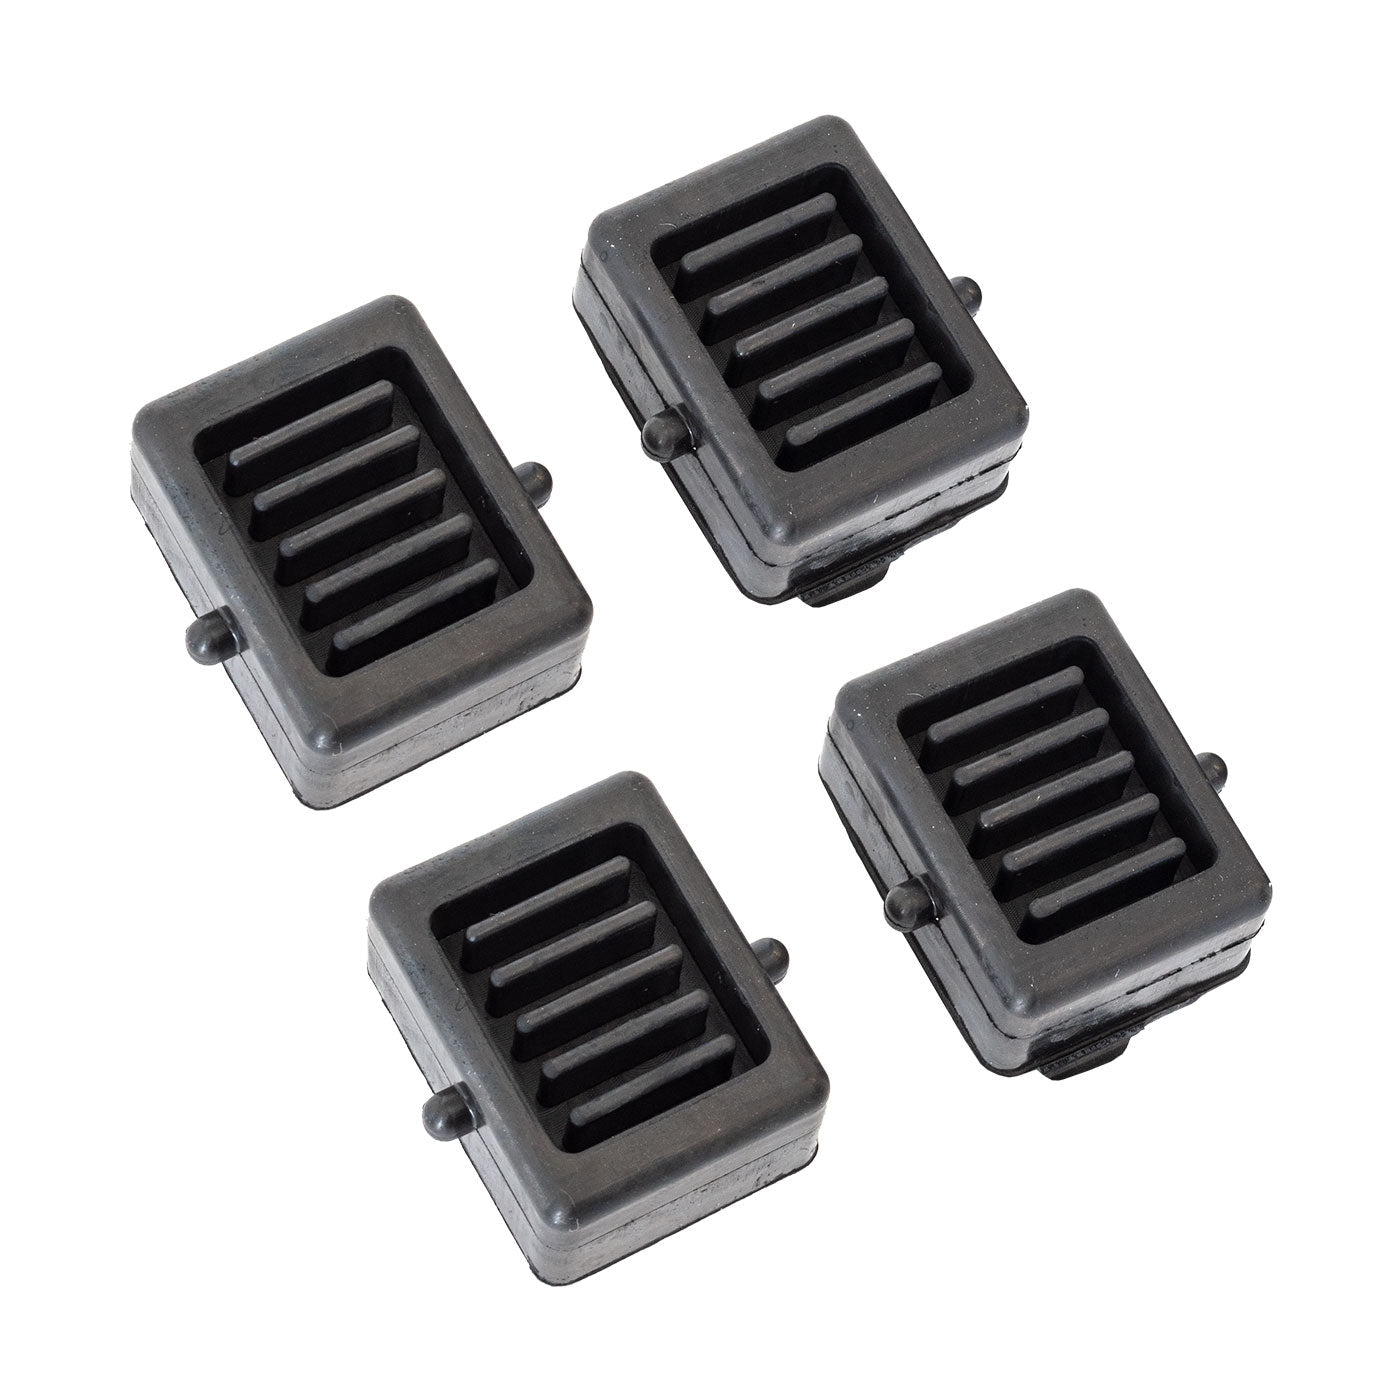 1994-2004 Ford Mustang or Cobra A/C Condenser Rubber Insulators Set of 4